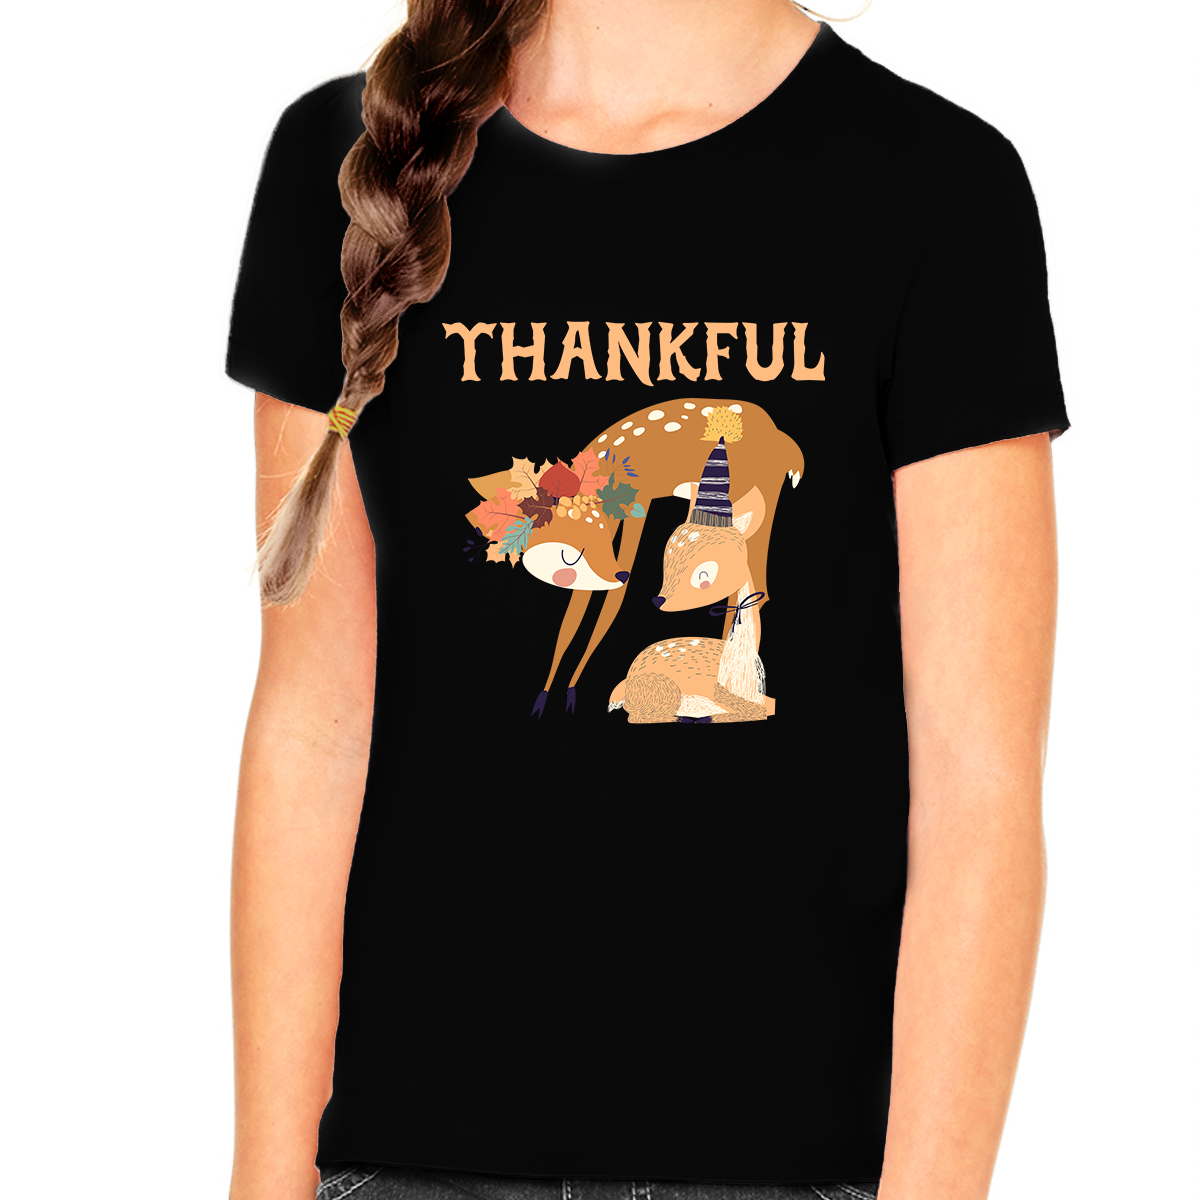 Thanksgiving Shirts for Girls Kids Thanksgiving Shirt Fall Tops for Girls Fall Shirts Thanksgiving Outfit